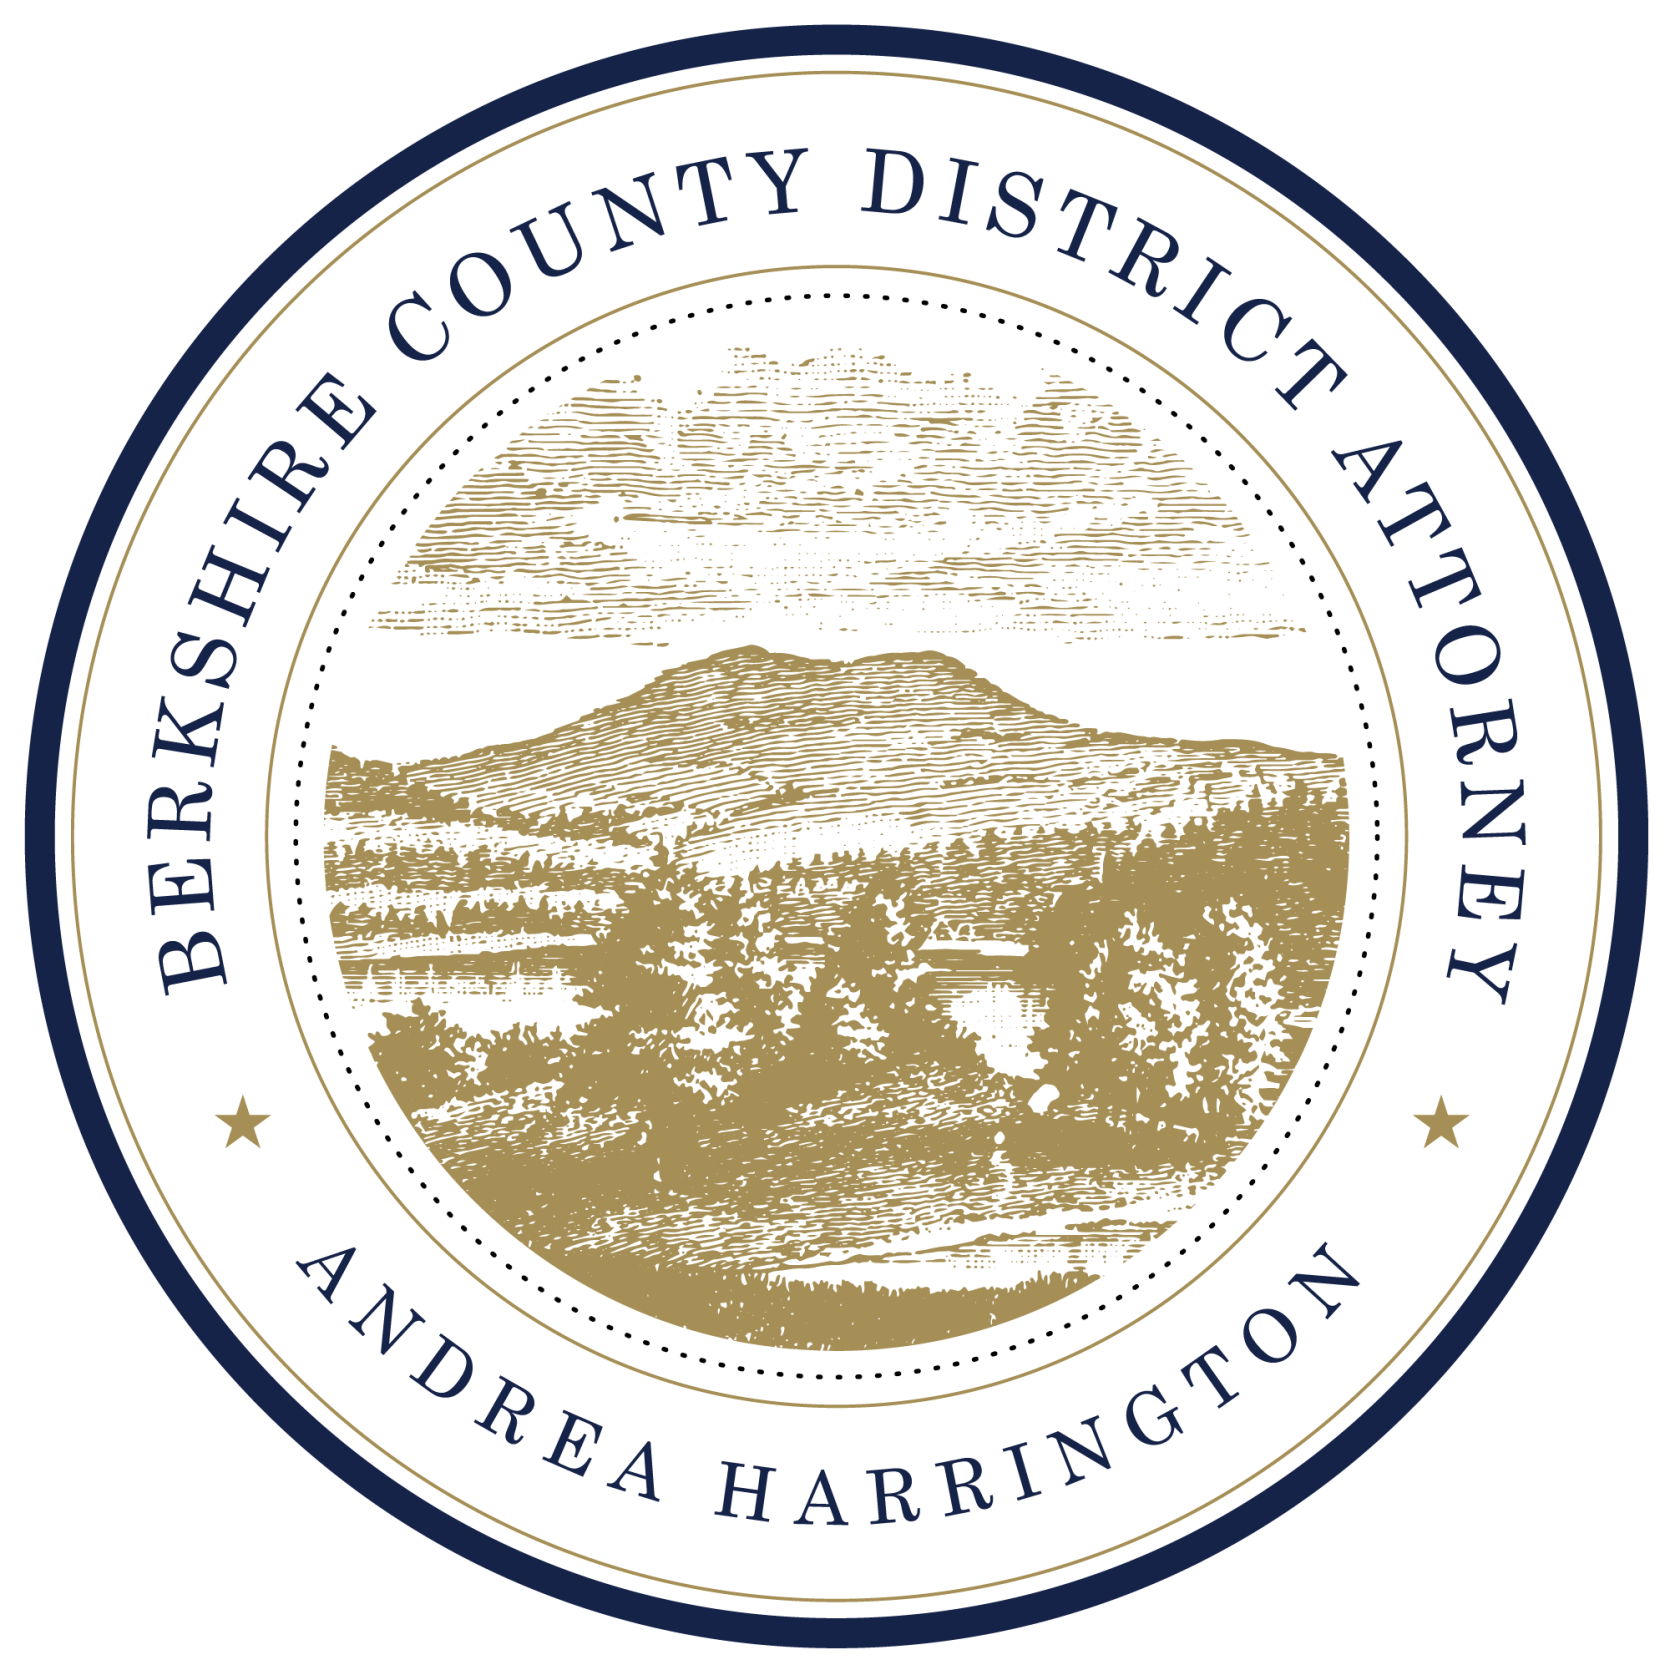 Berkshire District Attorney's Office seal.